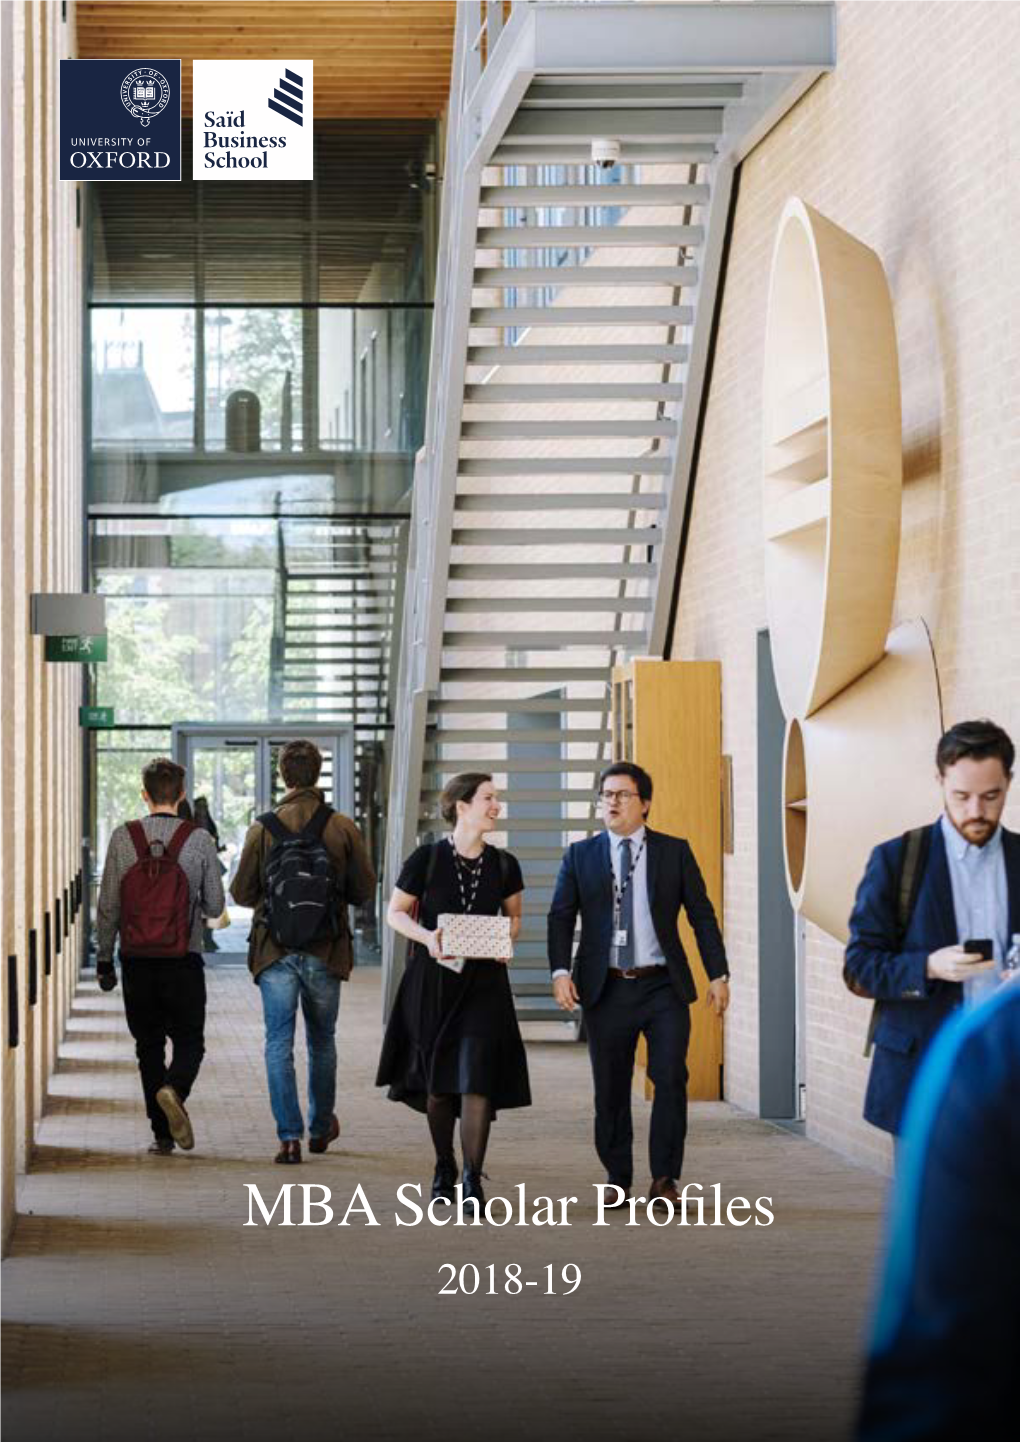 MBA Scholar Profiles 2018-19 ‘Education Is One of the Most Powerful Ways to Transform Individuals and Societies